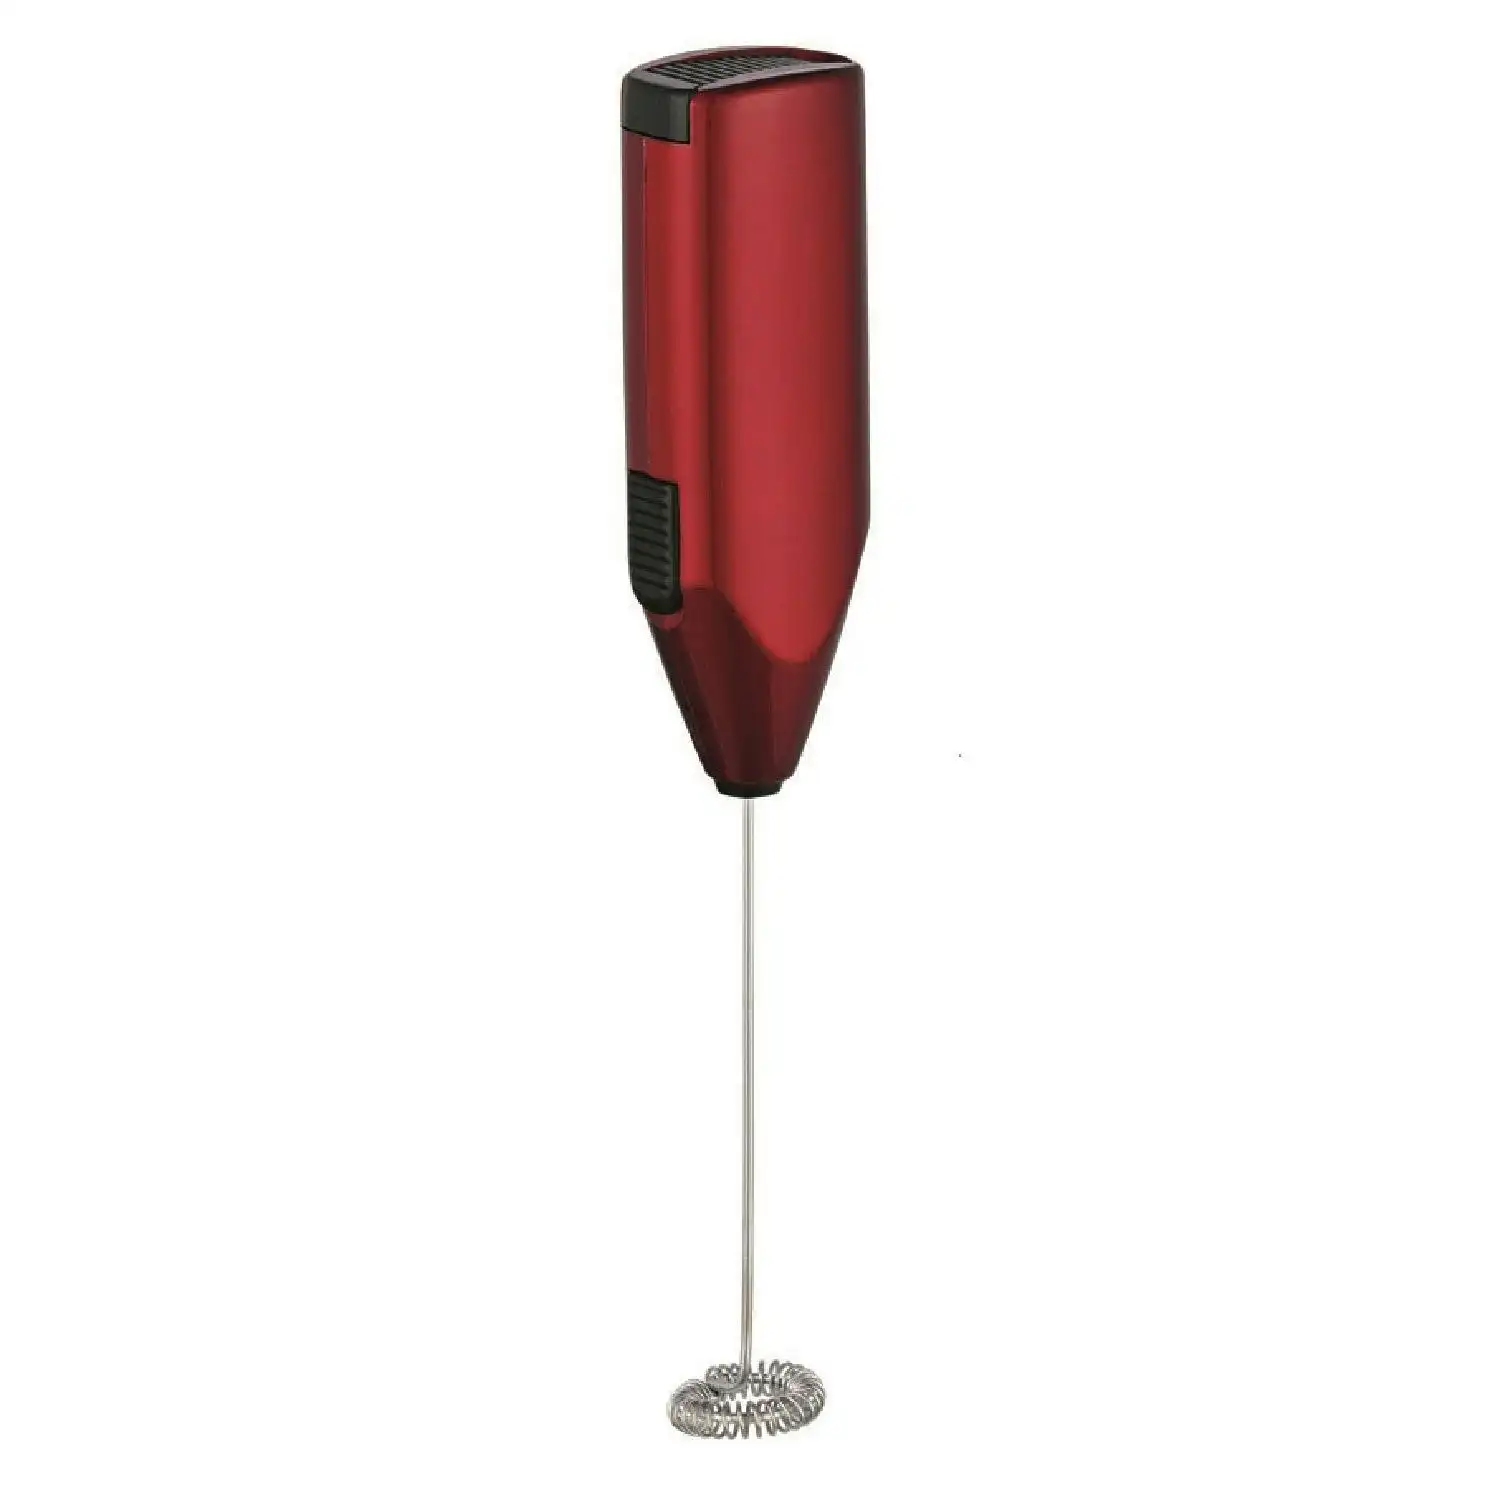 Avanti Little Whipper Milk Frother With Stand   Red